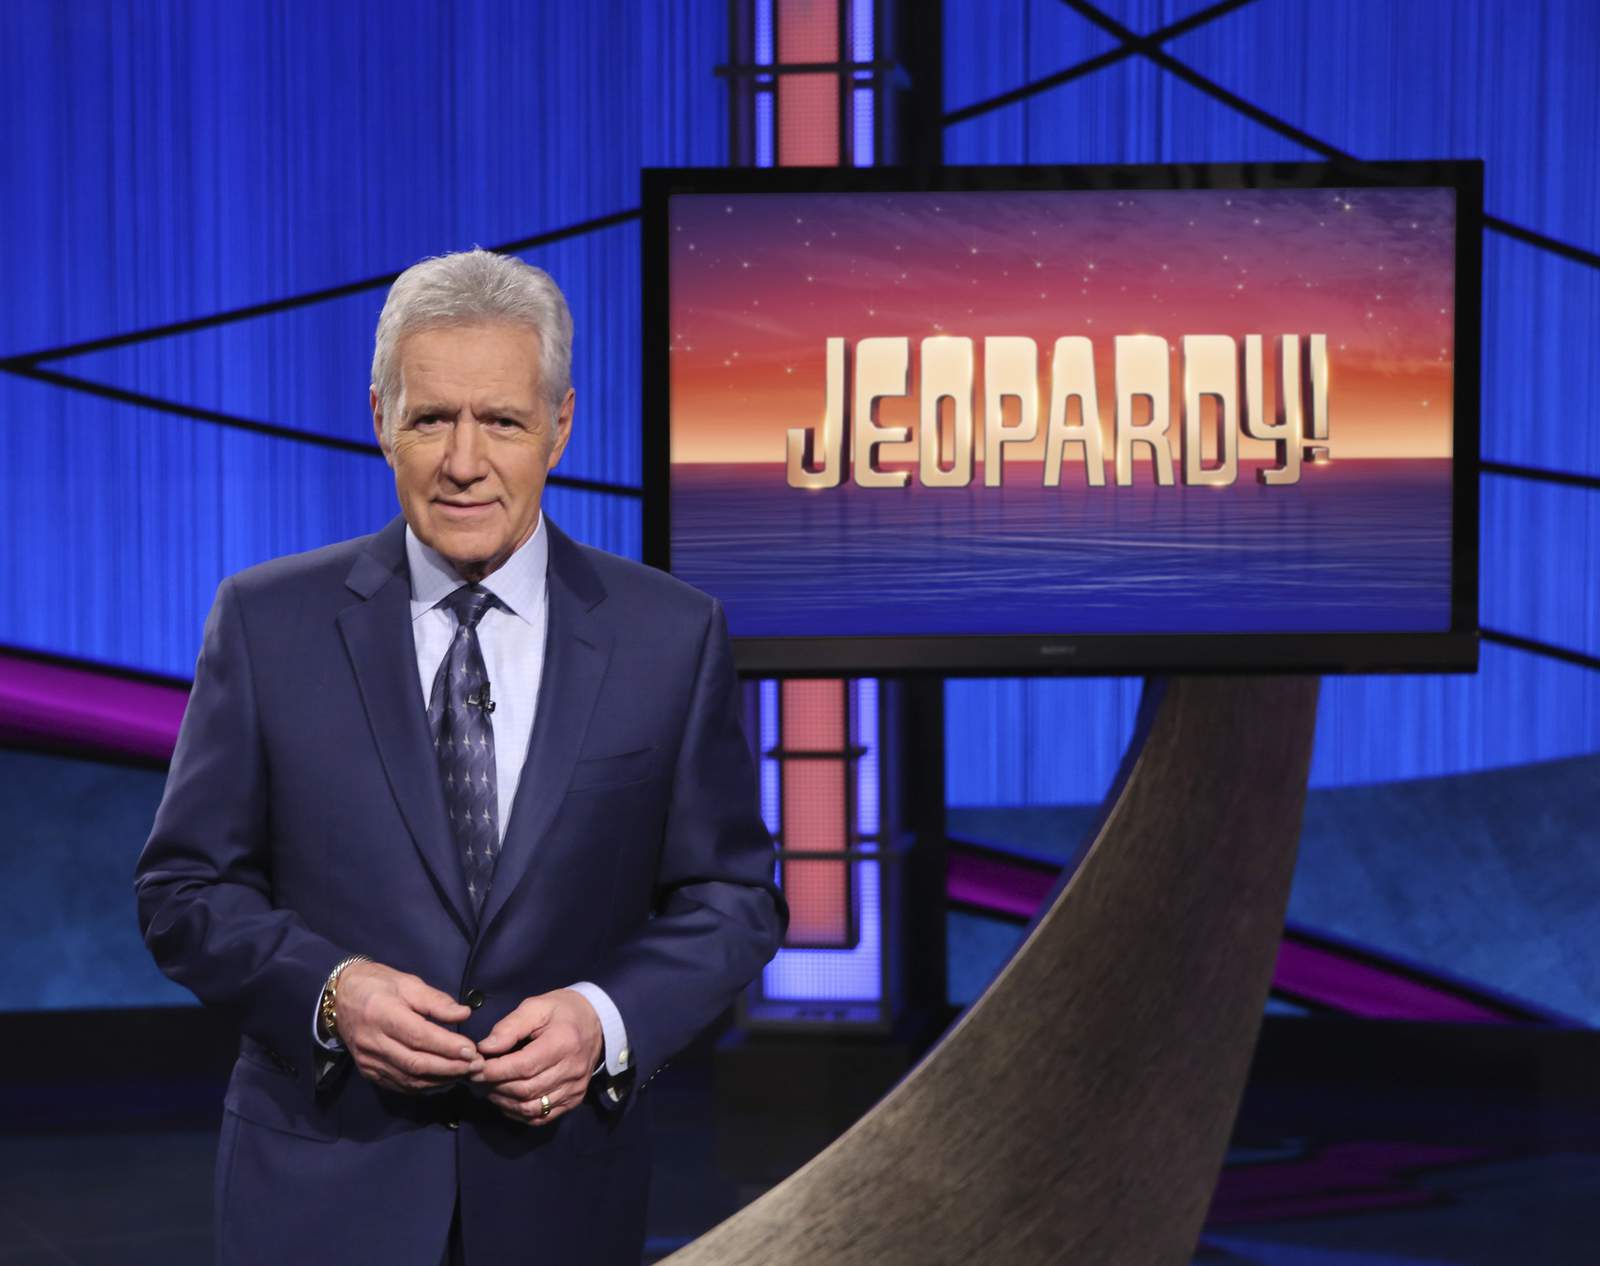 Jeopardy host Alex Trebek passes away after battling stage 4 pancreatic cancer